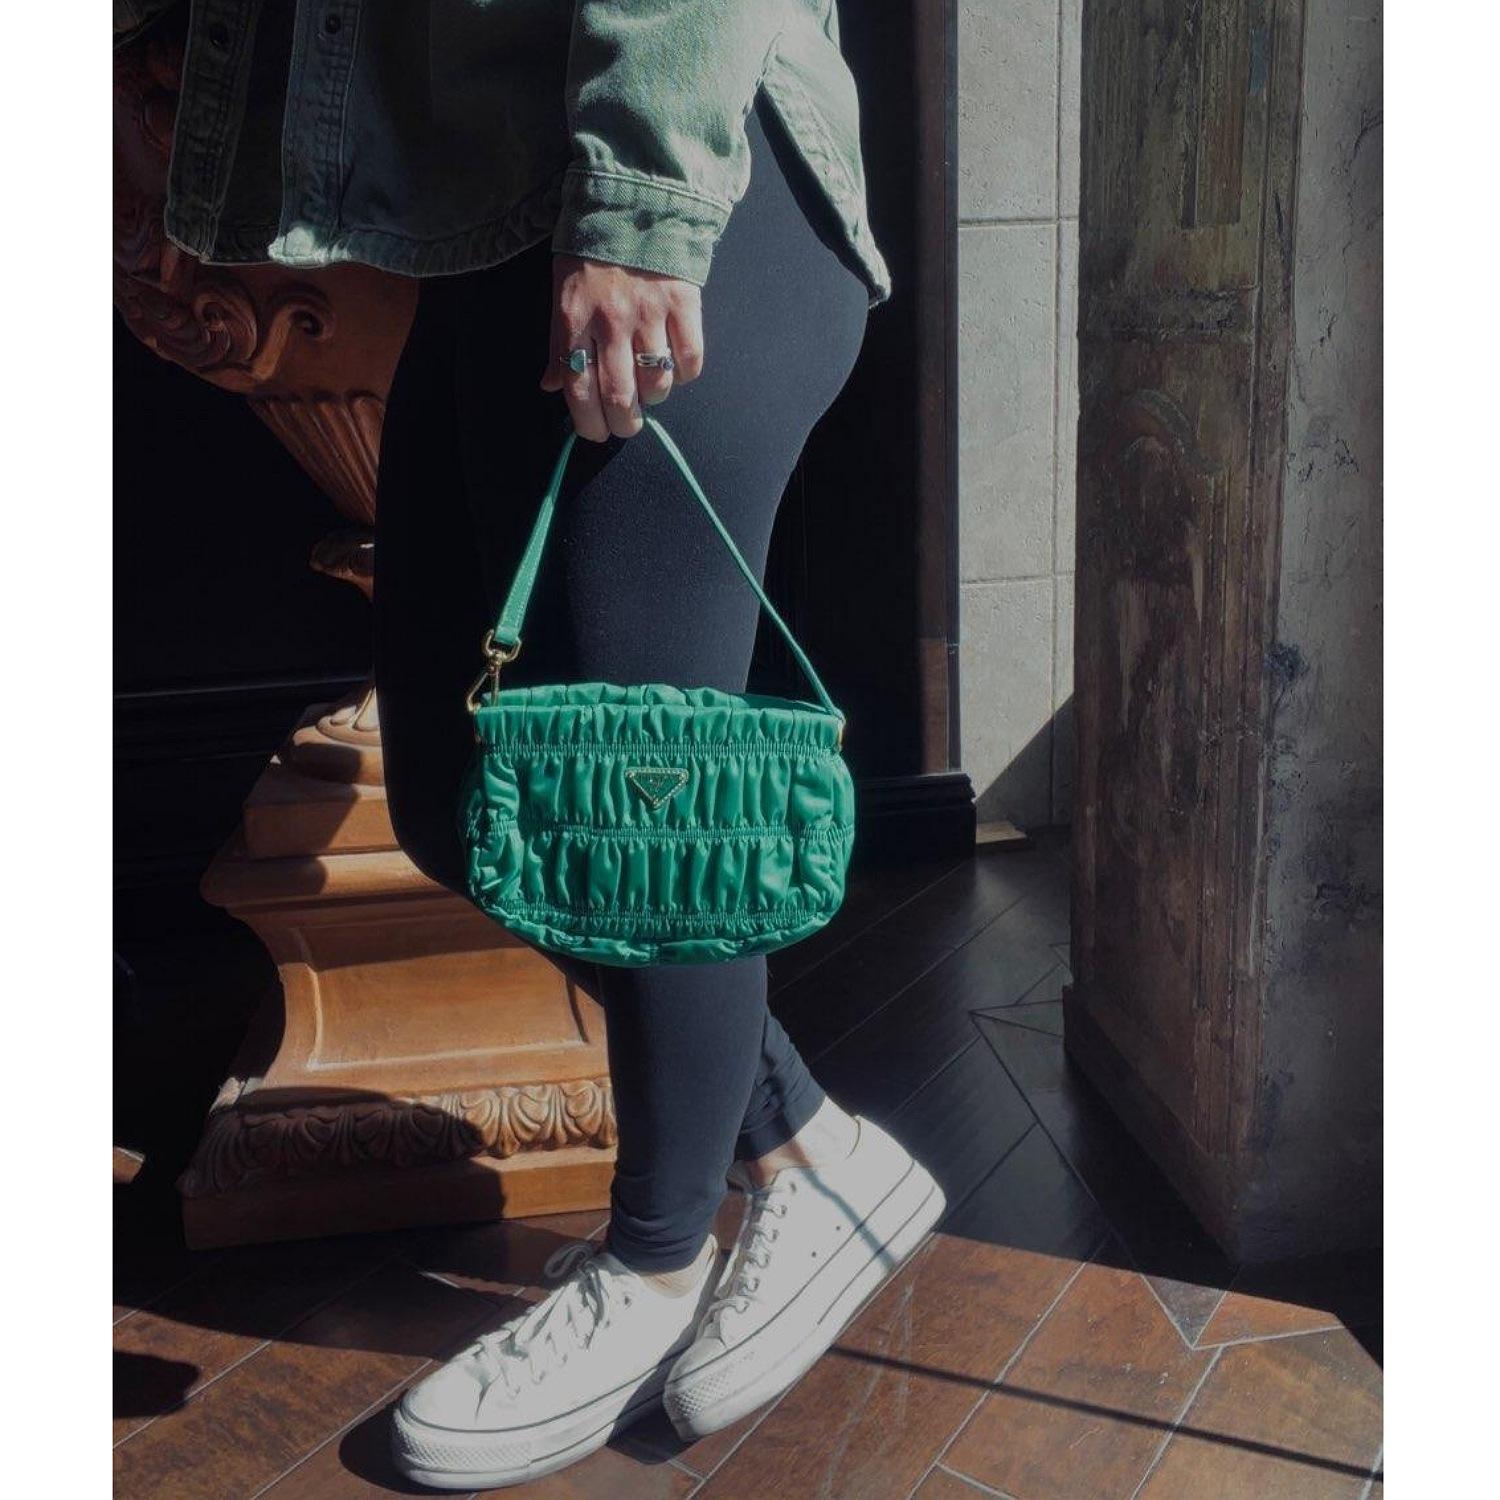 Prada Tessuto Nylon Gaufre Shoulder Bag in Mint Green. This petite Prada handbag is crafted of pleated tessuto nylon in green with gold hardware. The bag features a looping leather shoulder strap and the top zipper opens to a green Prada logo